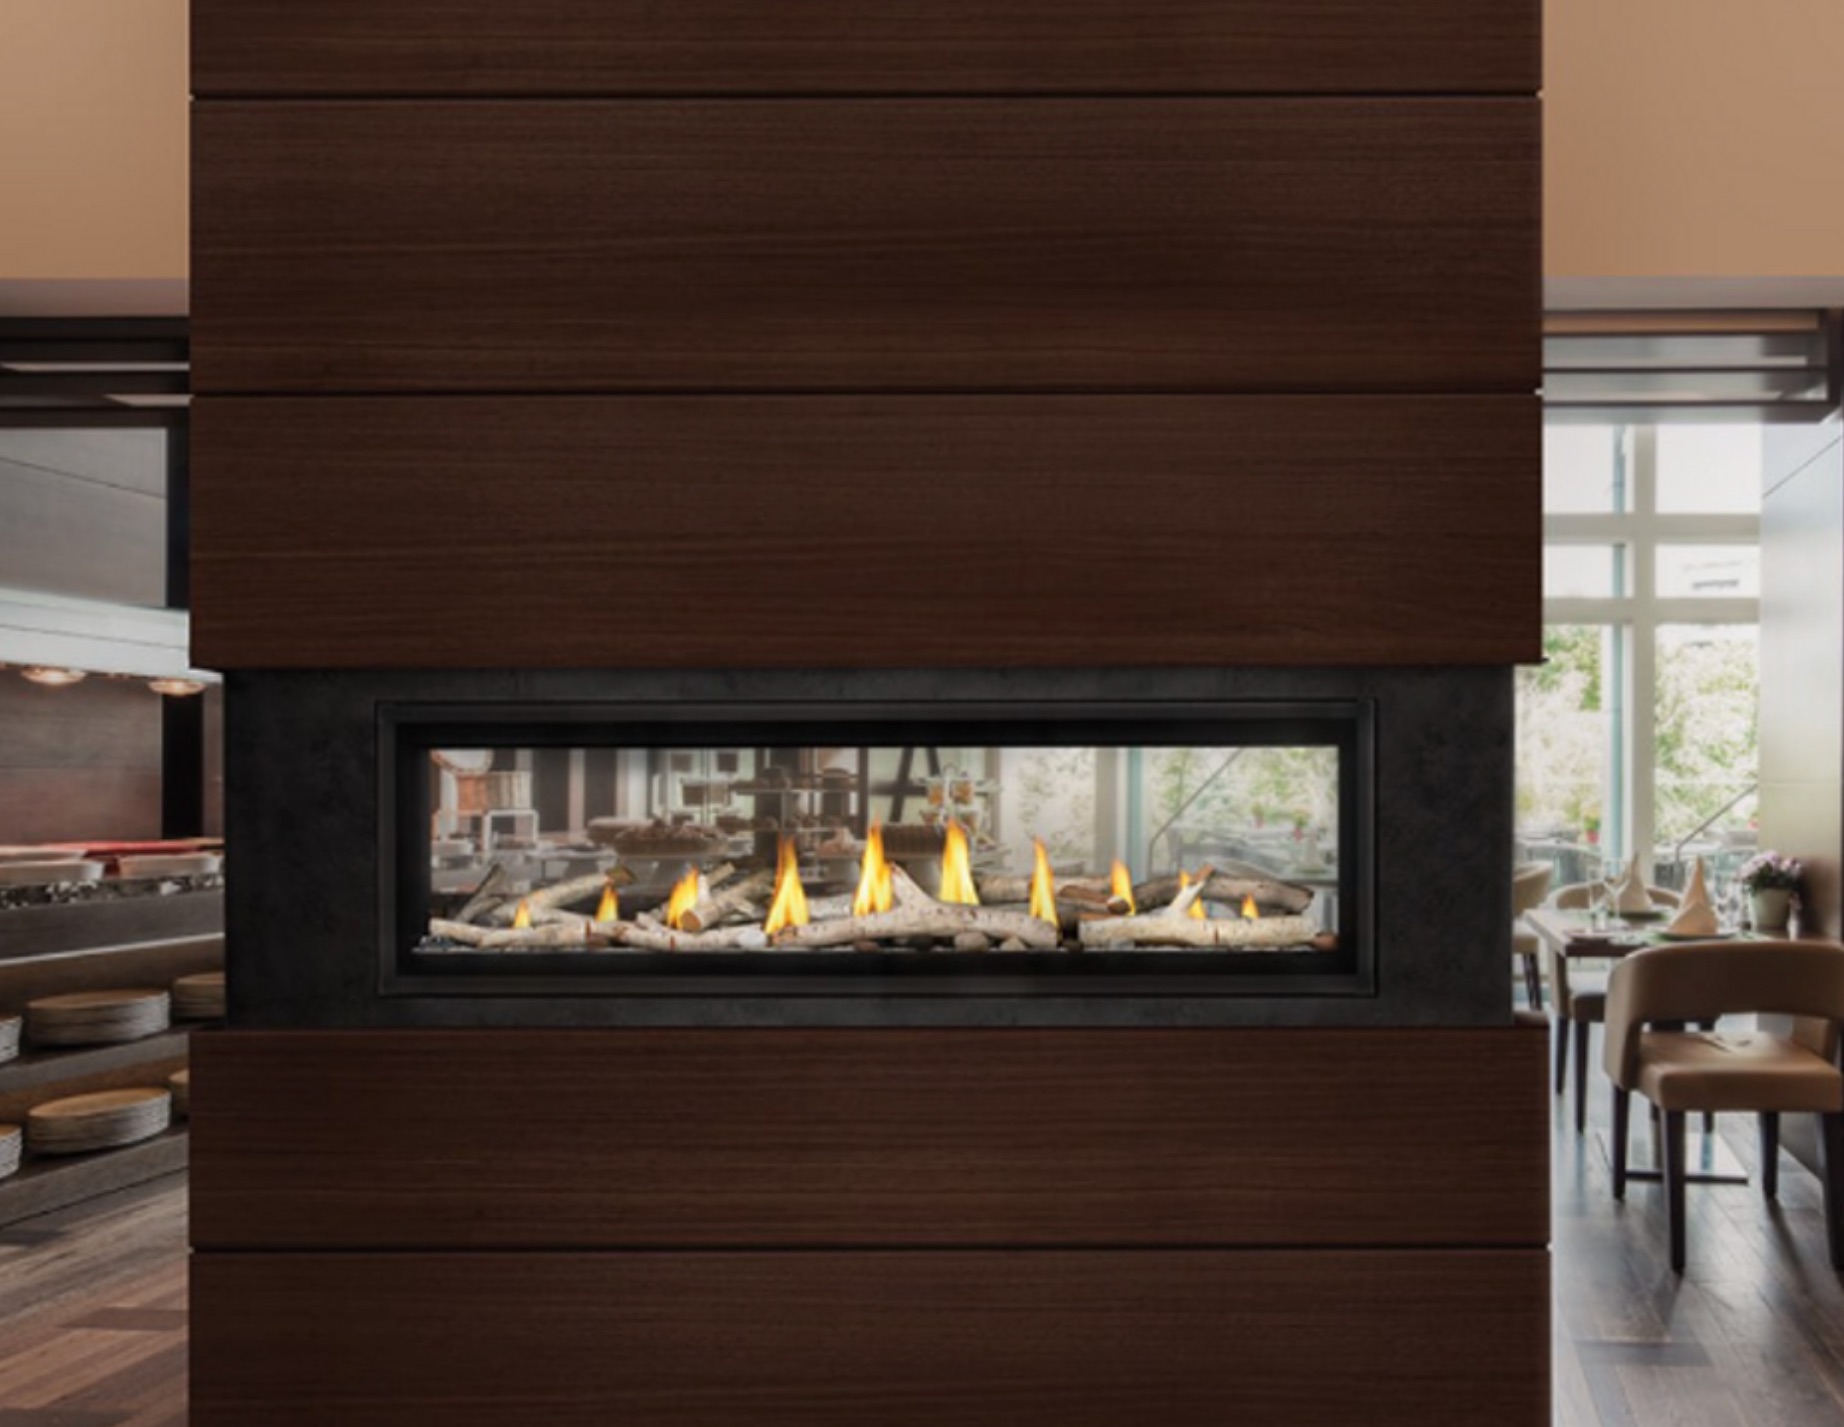 napoleon gas fireplace in brown paneled dividing wall see through